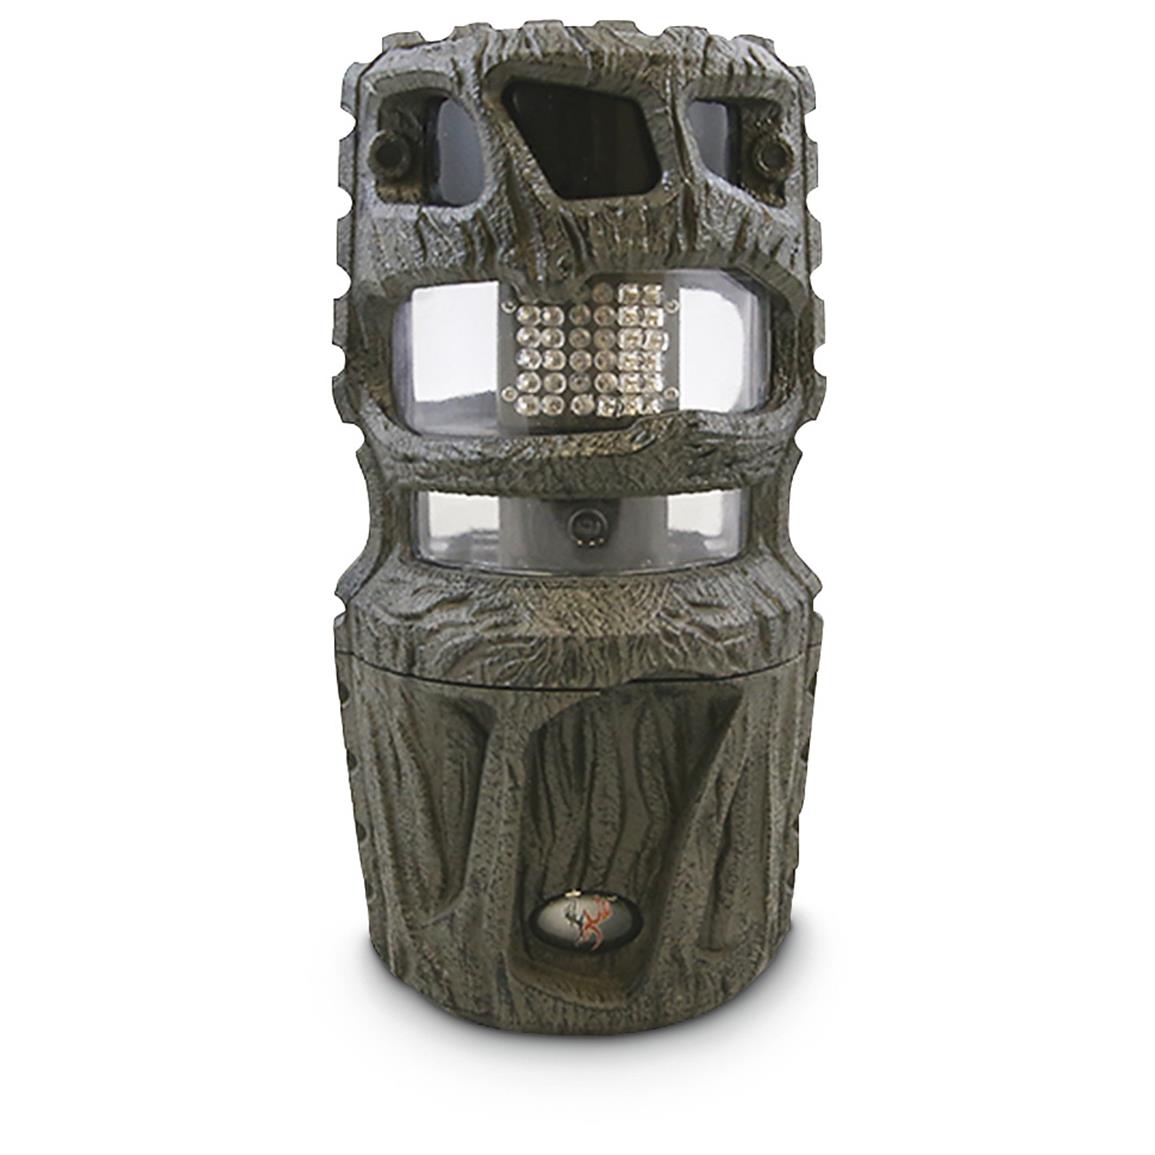 Wildgame Innovations 360 Degree Trail Camera - 637867, Game & Trail